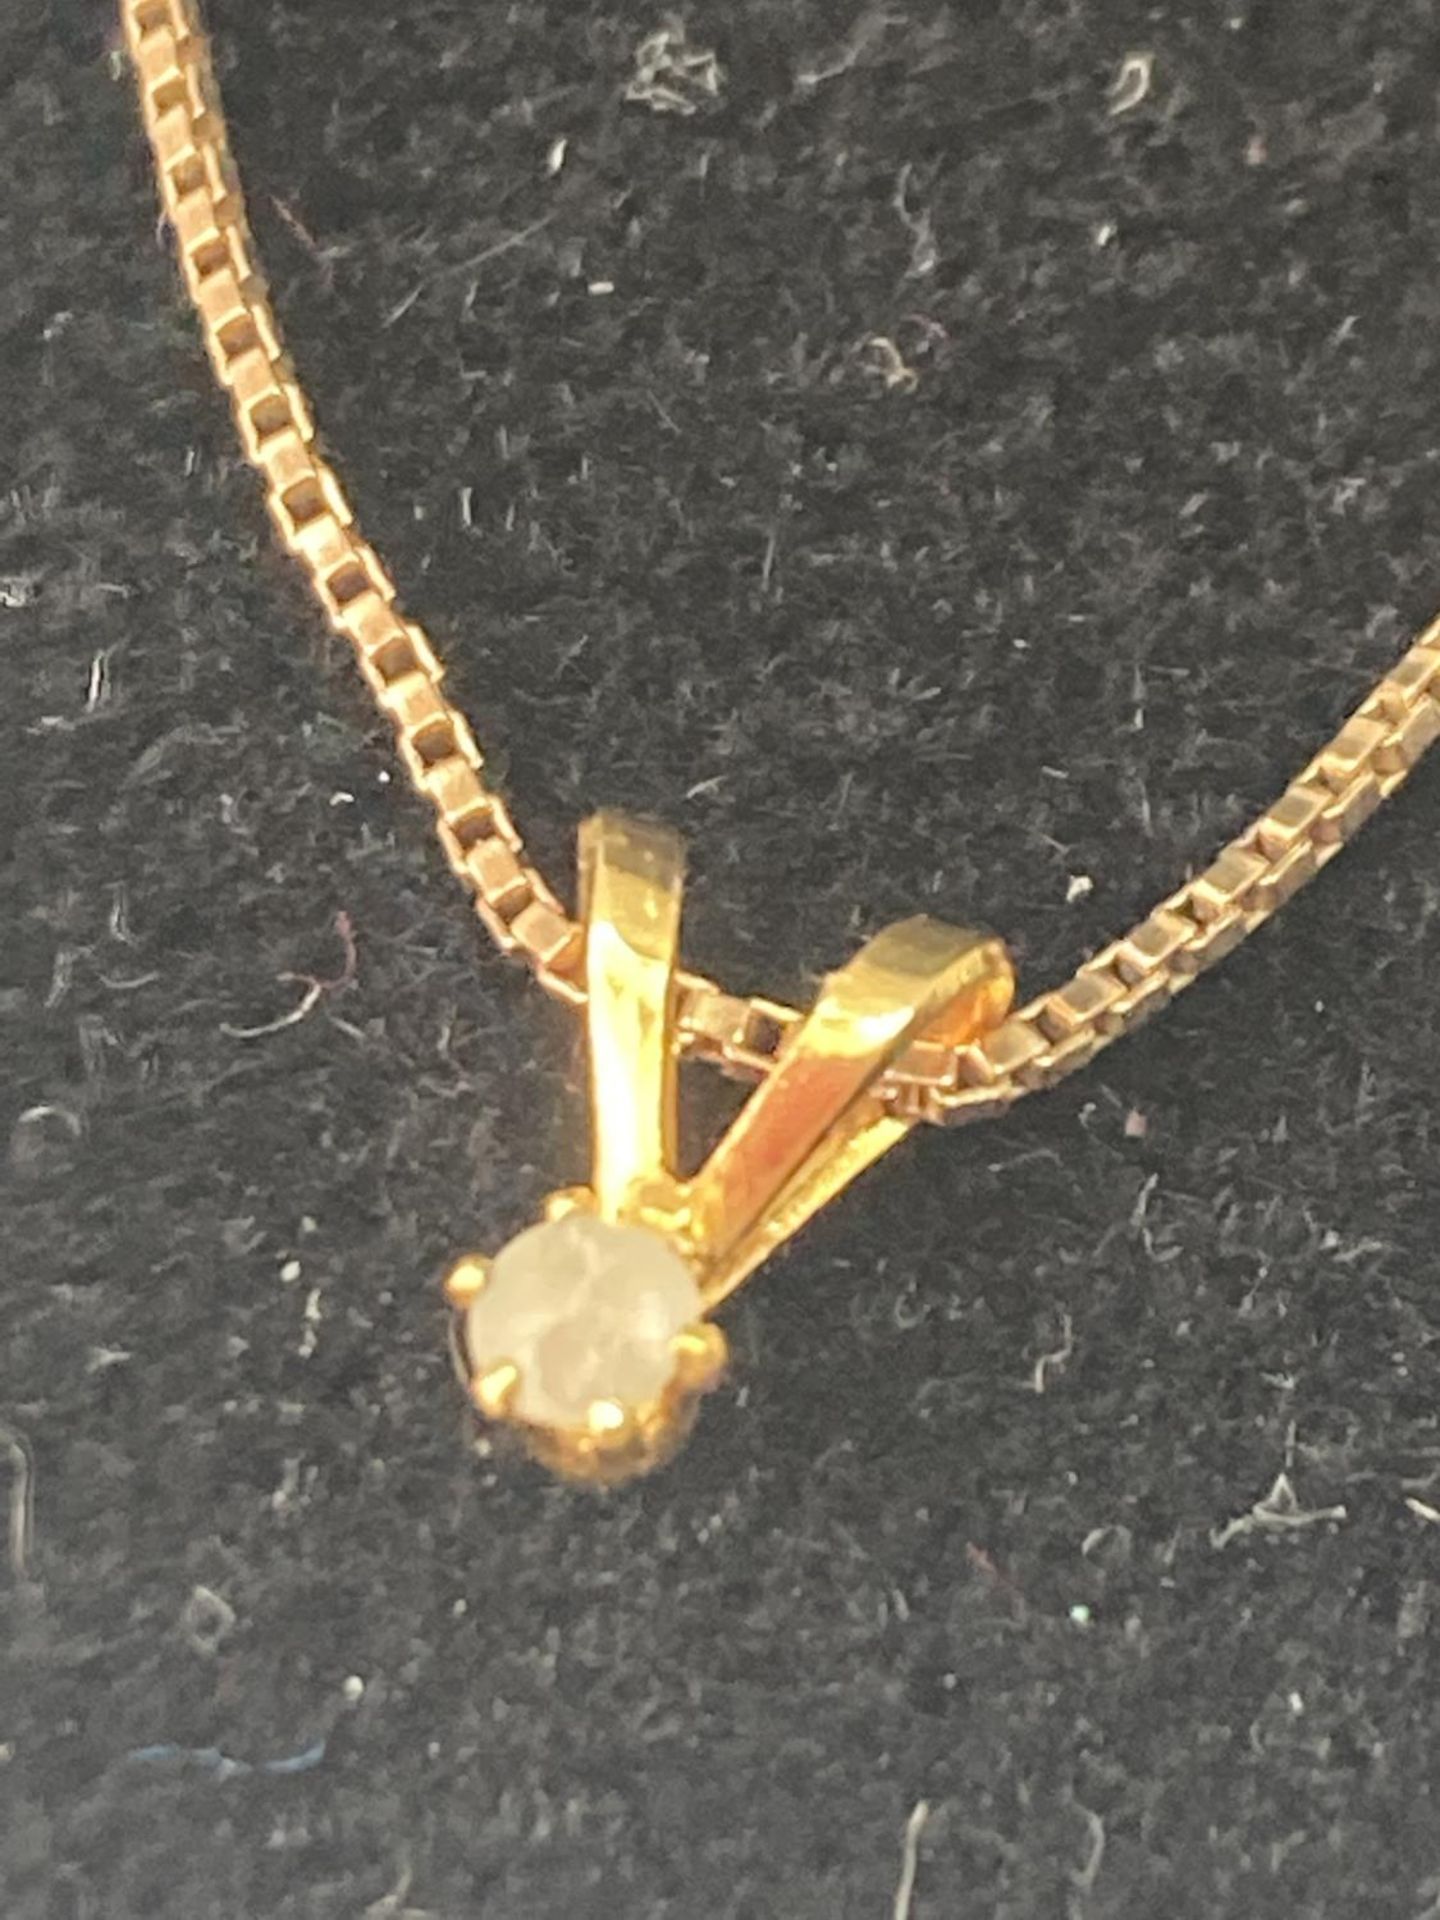 A 9 CARAT GOLD NECKLACE WITH A 9 CARAT GOLD AND DIAMOND PENDANT IN A PRESENTATION BOX - Image 3 of 10